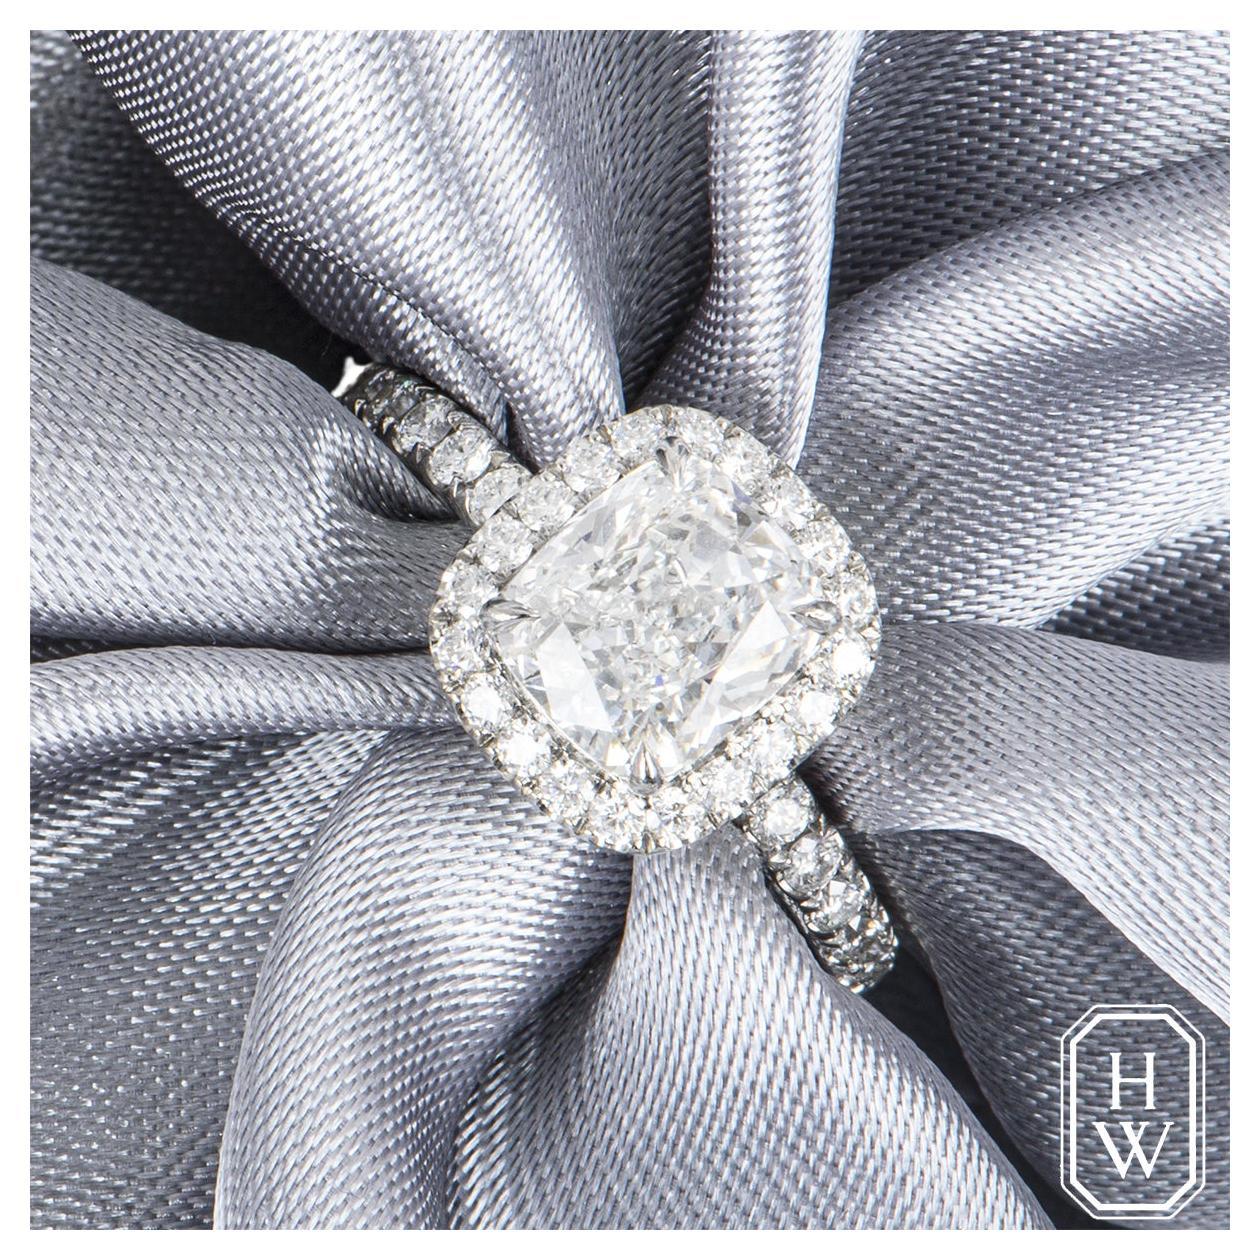 A glamorous platinum diamond engagement ring by Harry Winston from The One collection. The ring is set to the centre in a four claw mount with a cushion cut diamond weighing 1.76ct, E colour and VVS1 clarity. The full eternity engagement ring